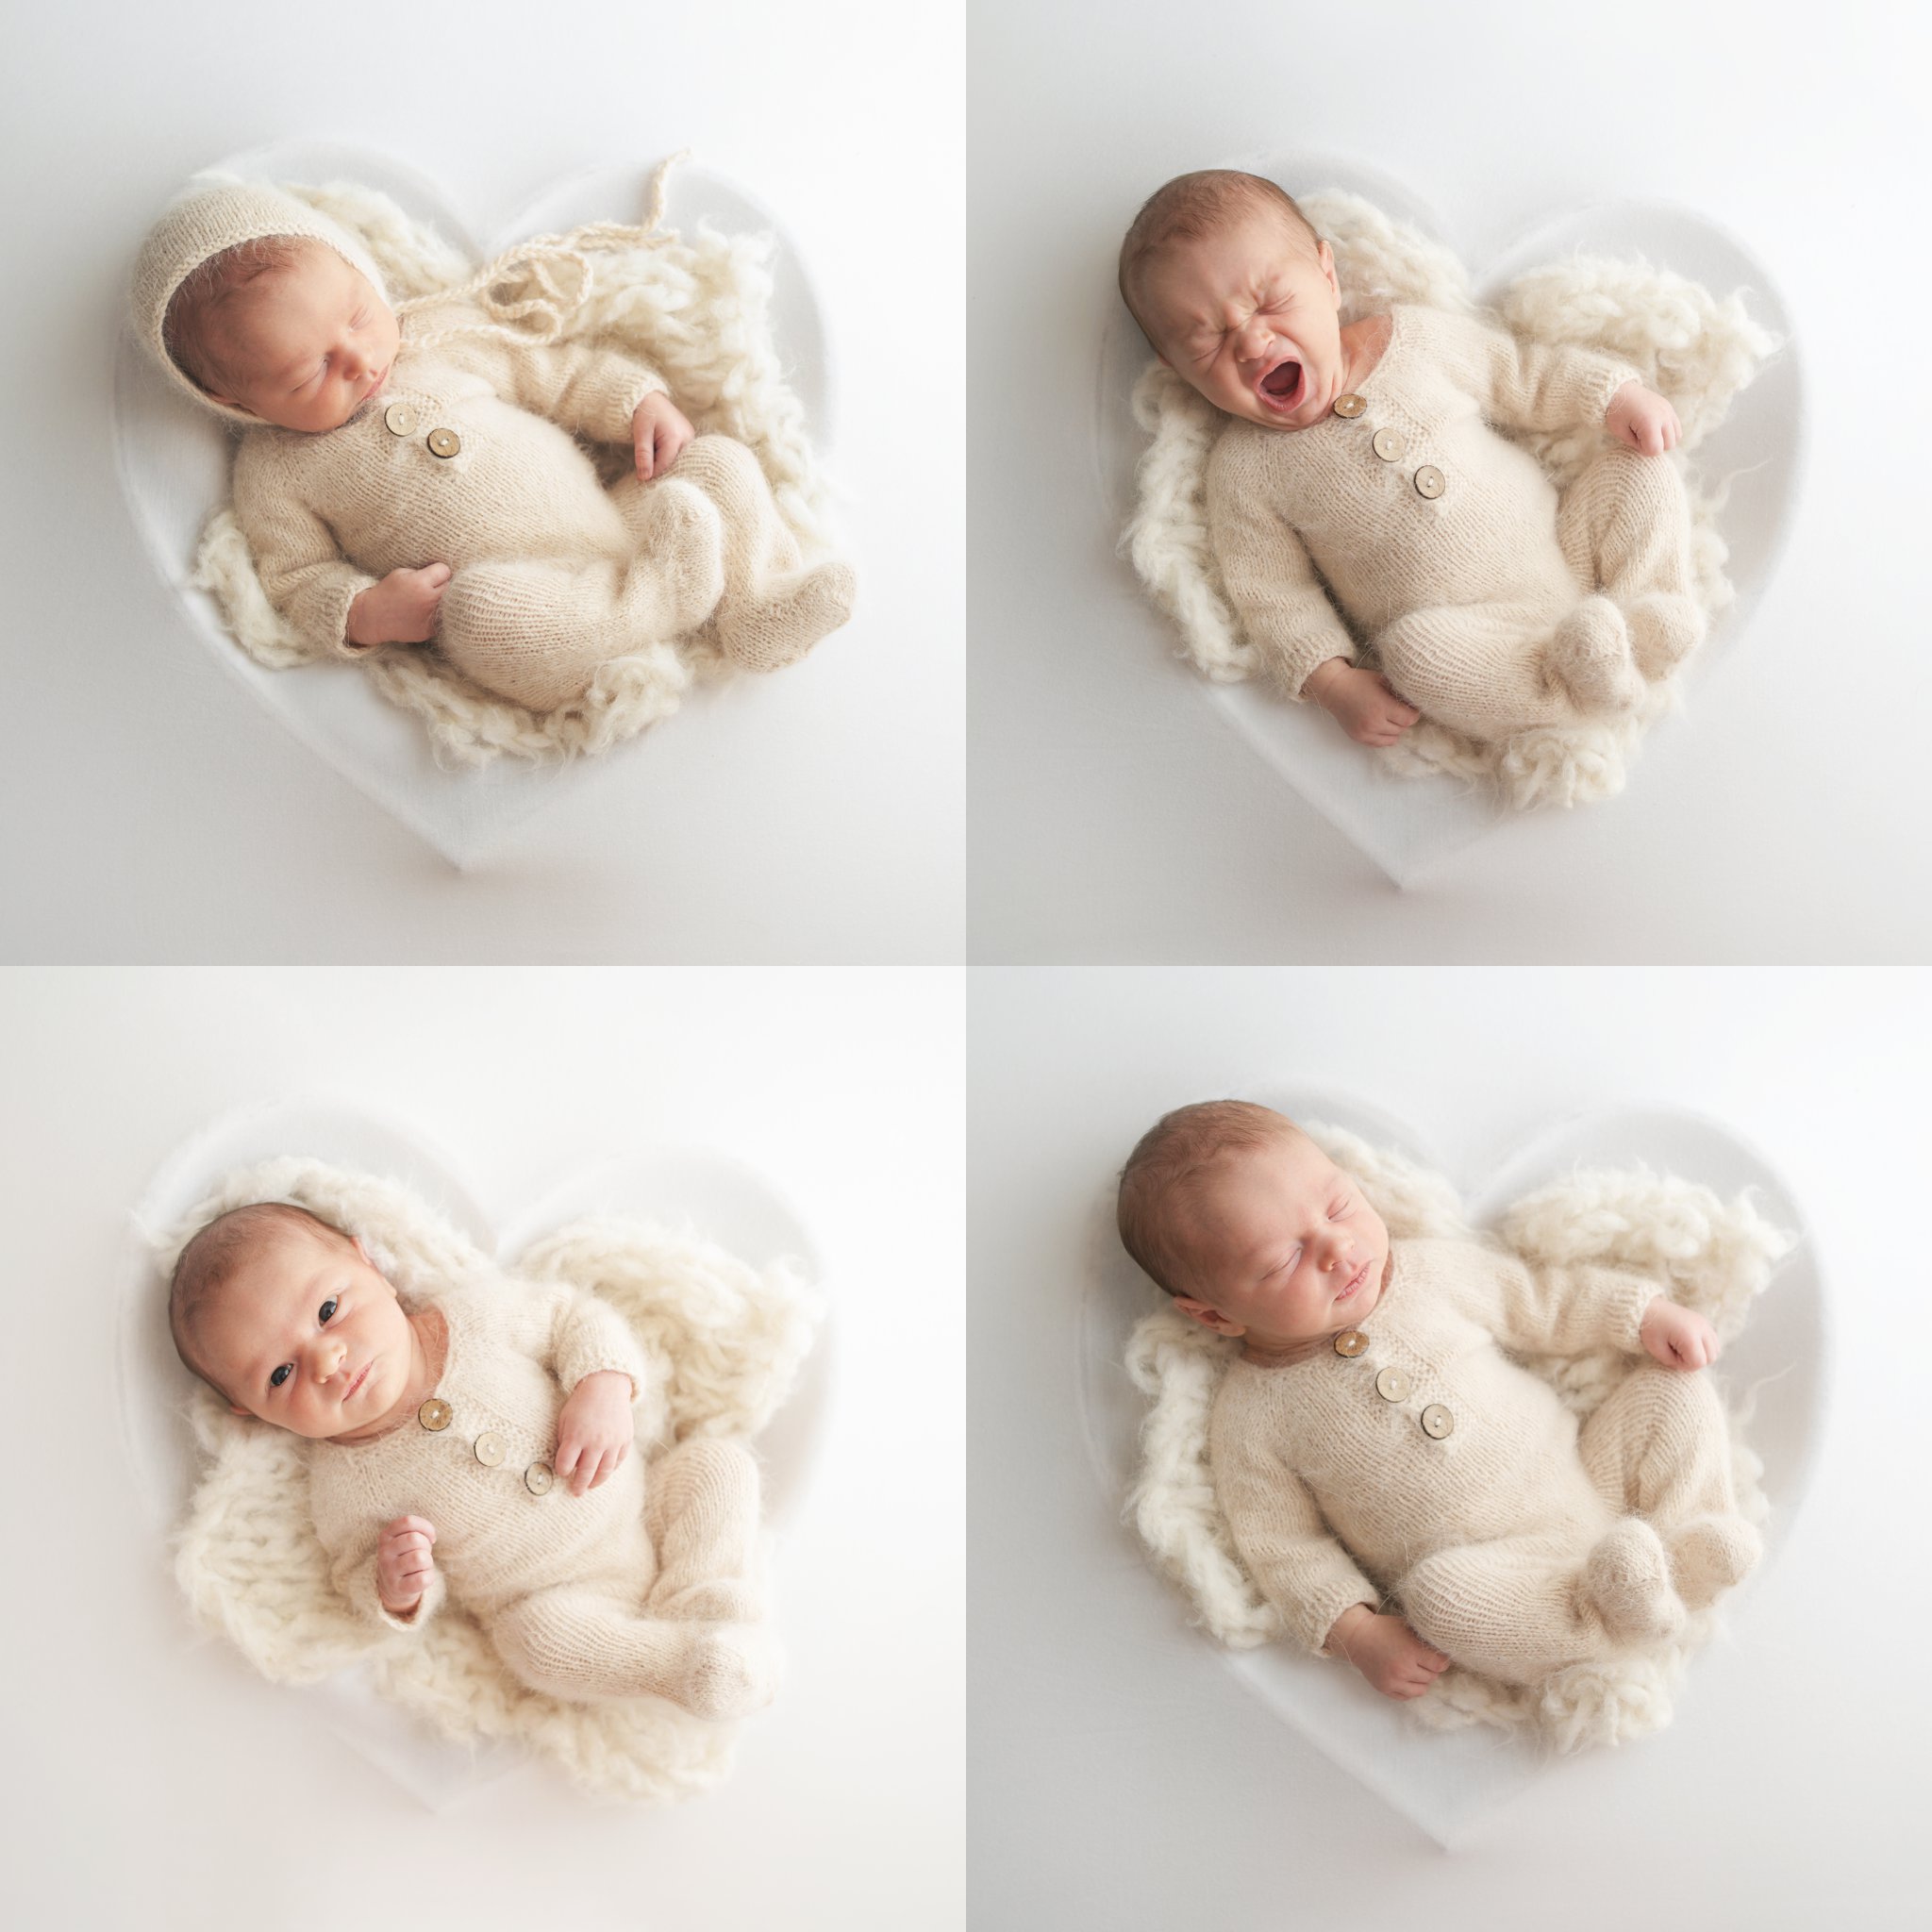 10 day old newborn Laying in a heart shaped prop in West Palm Beach Photography studio